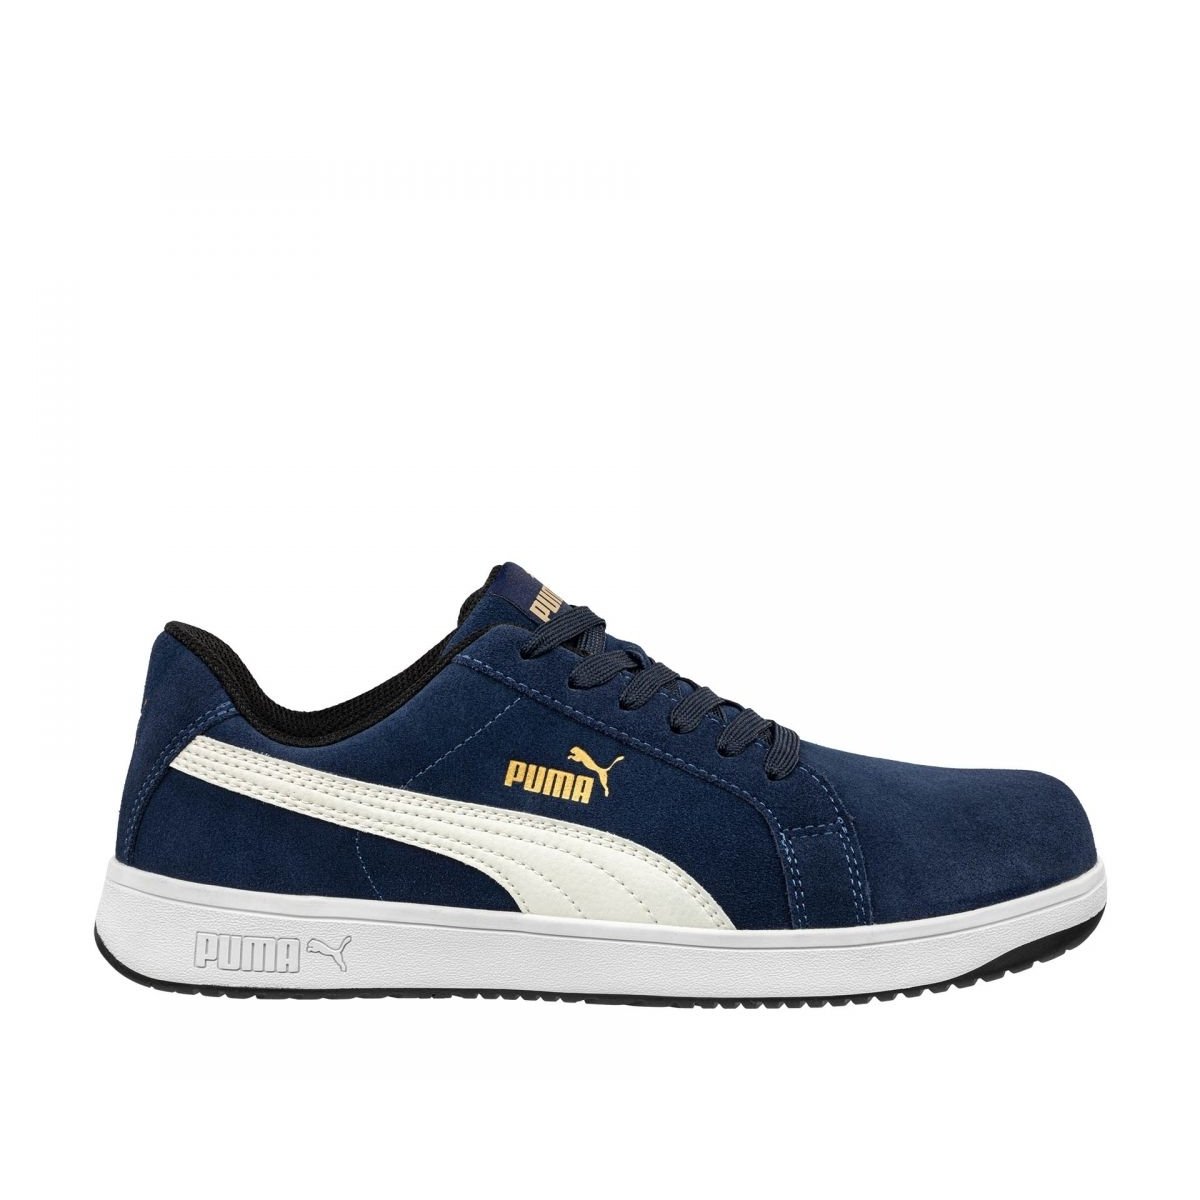 PUMA Safety Men's Iconic Low Composite Toe EH Work Shoes Navy Suede - 640025 ONE SIZE Navy - Navy, 11.5